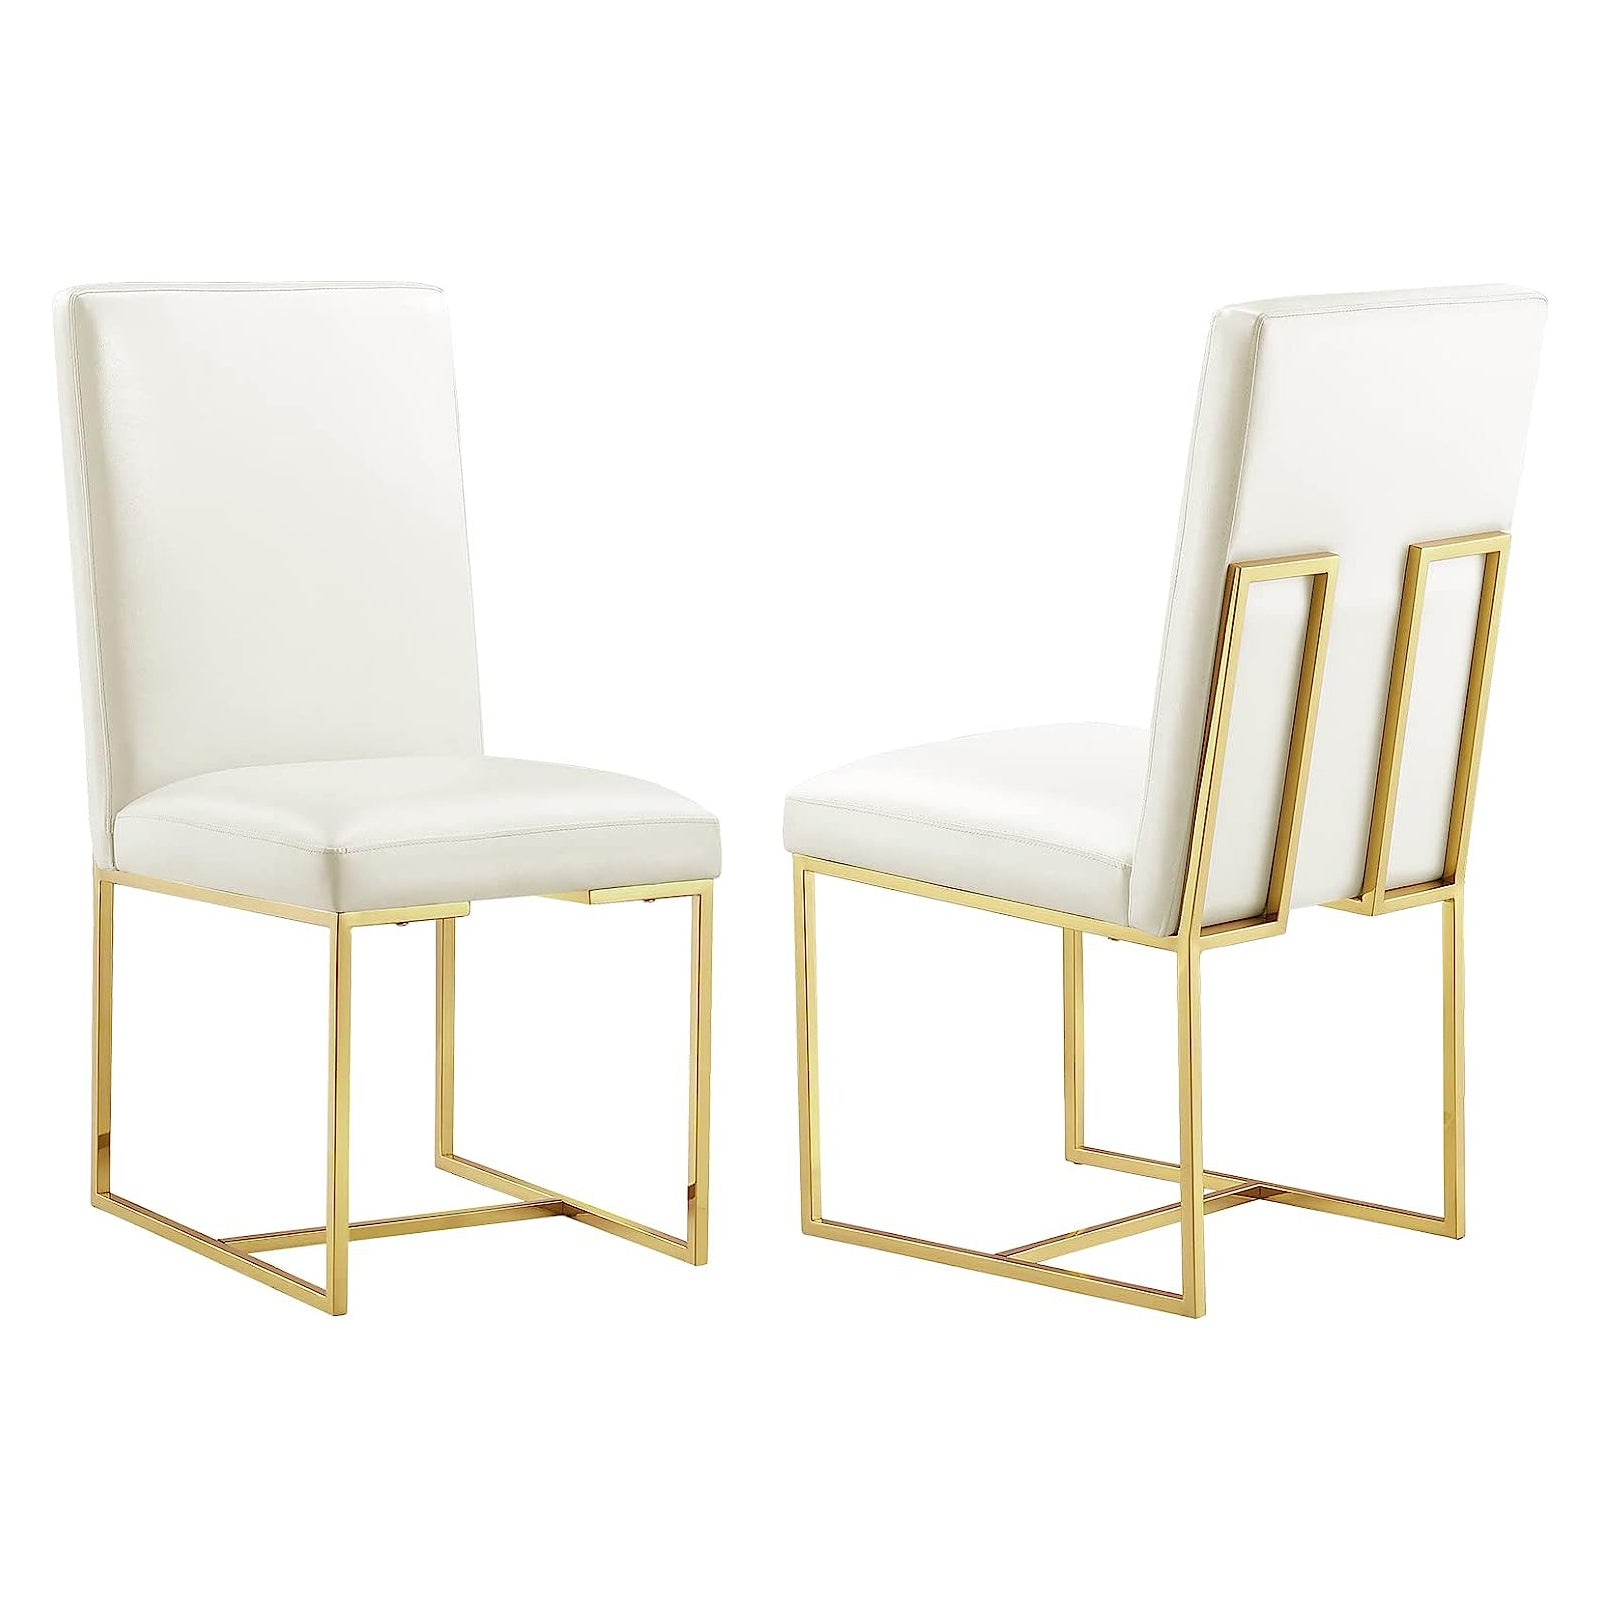 Stylish Dining Redefined: White Leather and Gold Accents